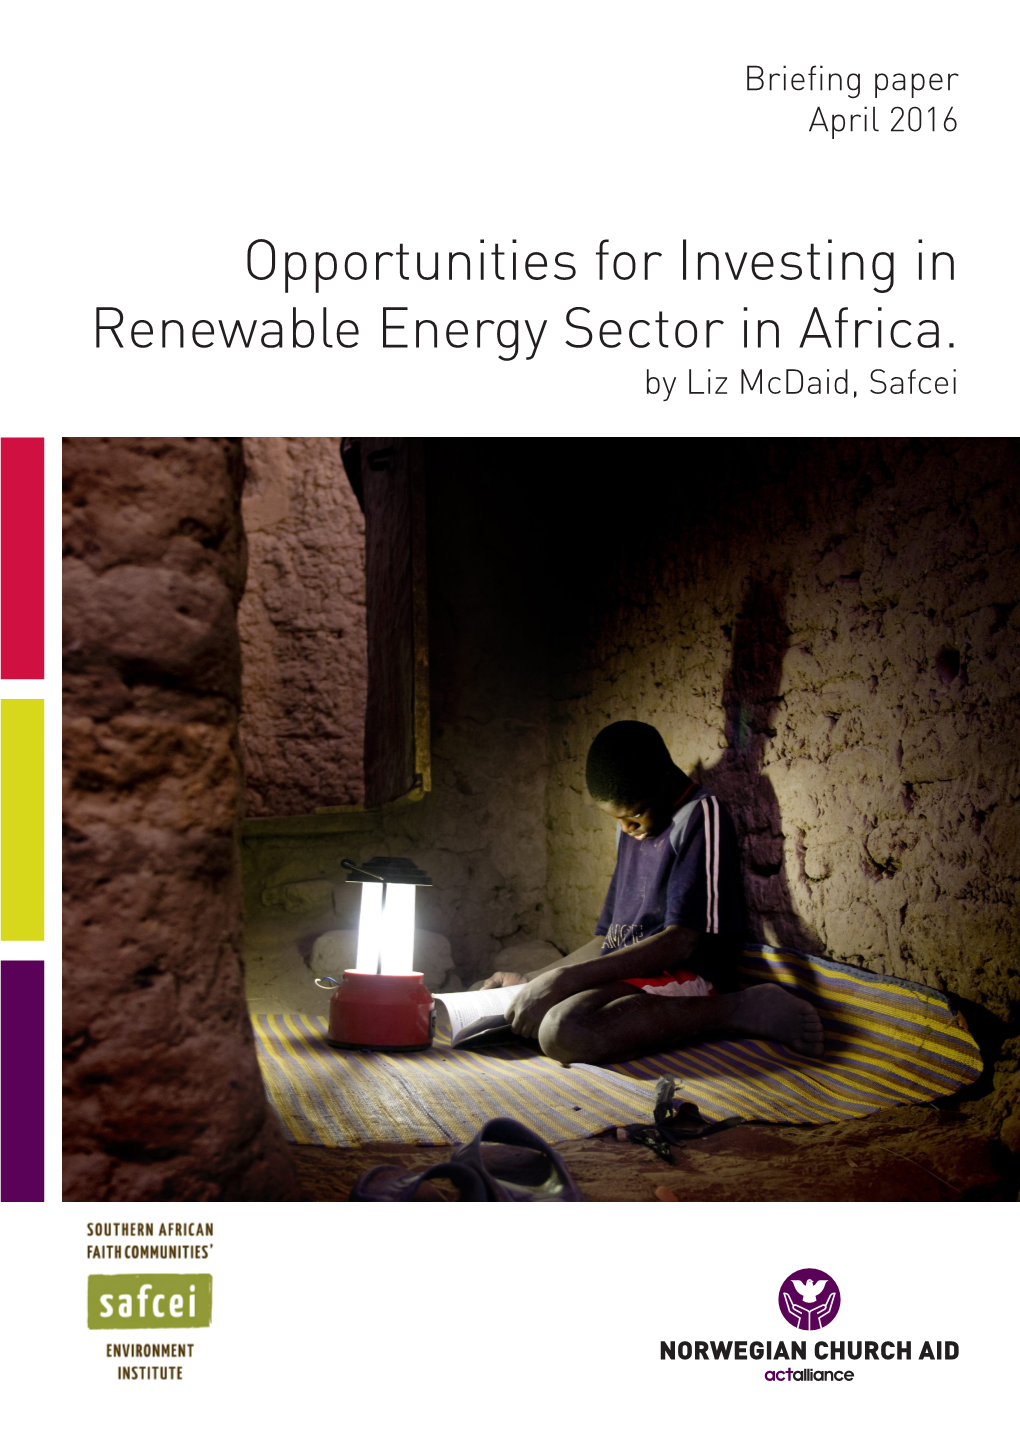 Briefing Paper 2016 Opportunities for Investing in Renwable Energy